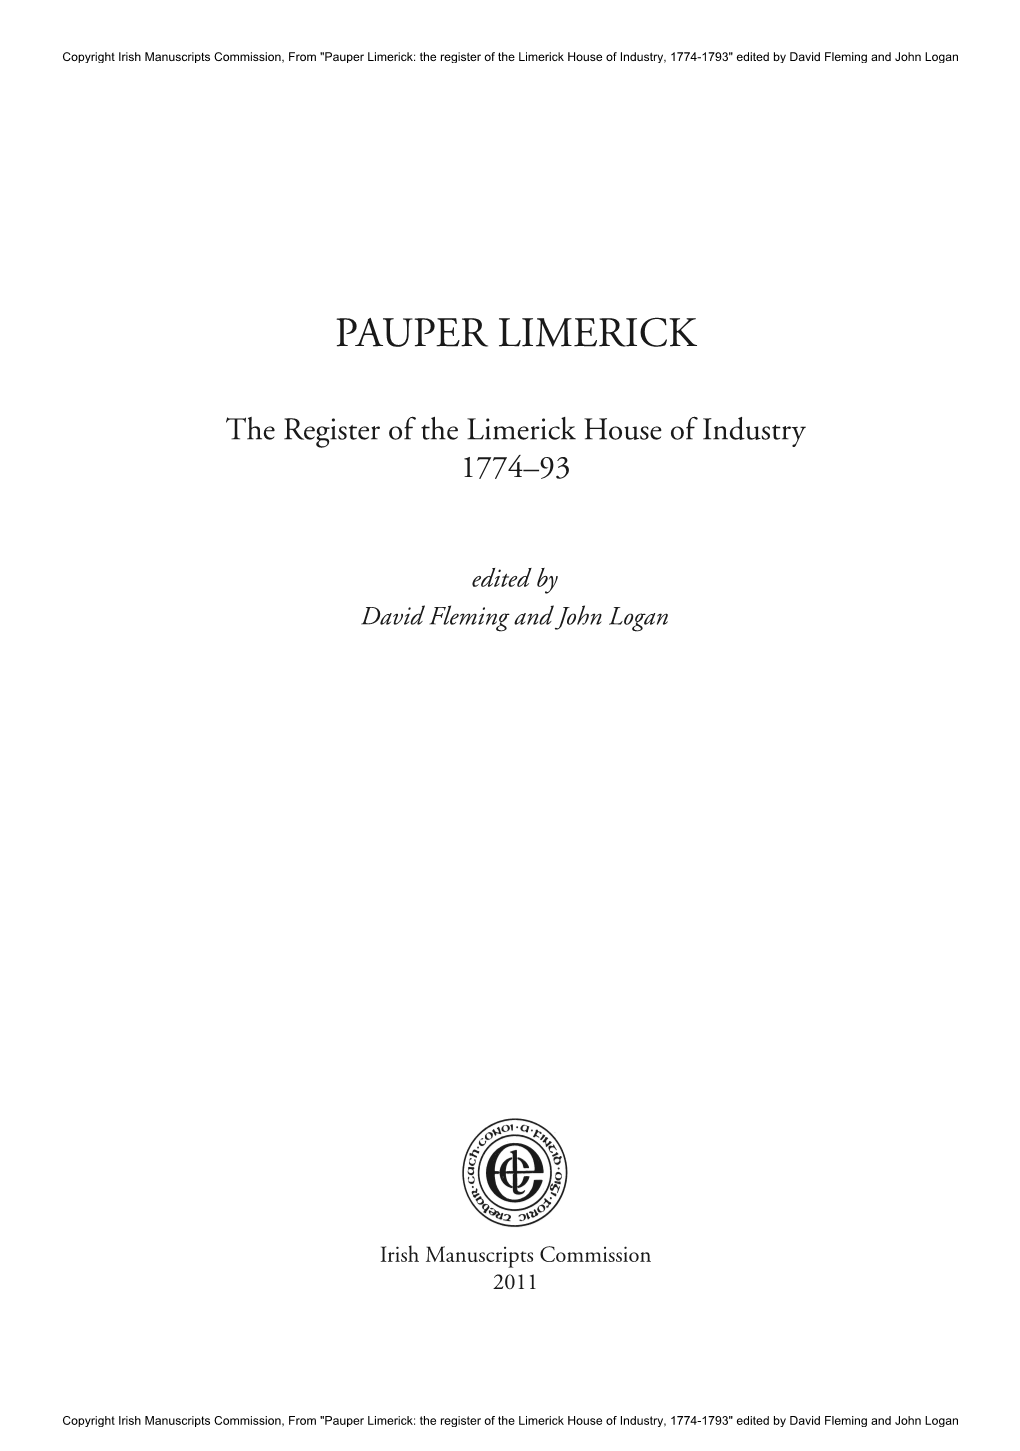 Pauper Limerick: the Register of the Limerick House of Industry, 1774-1793" Edited by David Fleming and John Logan